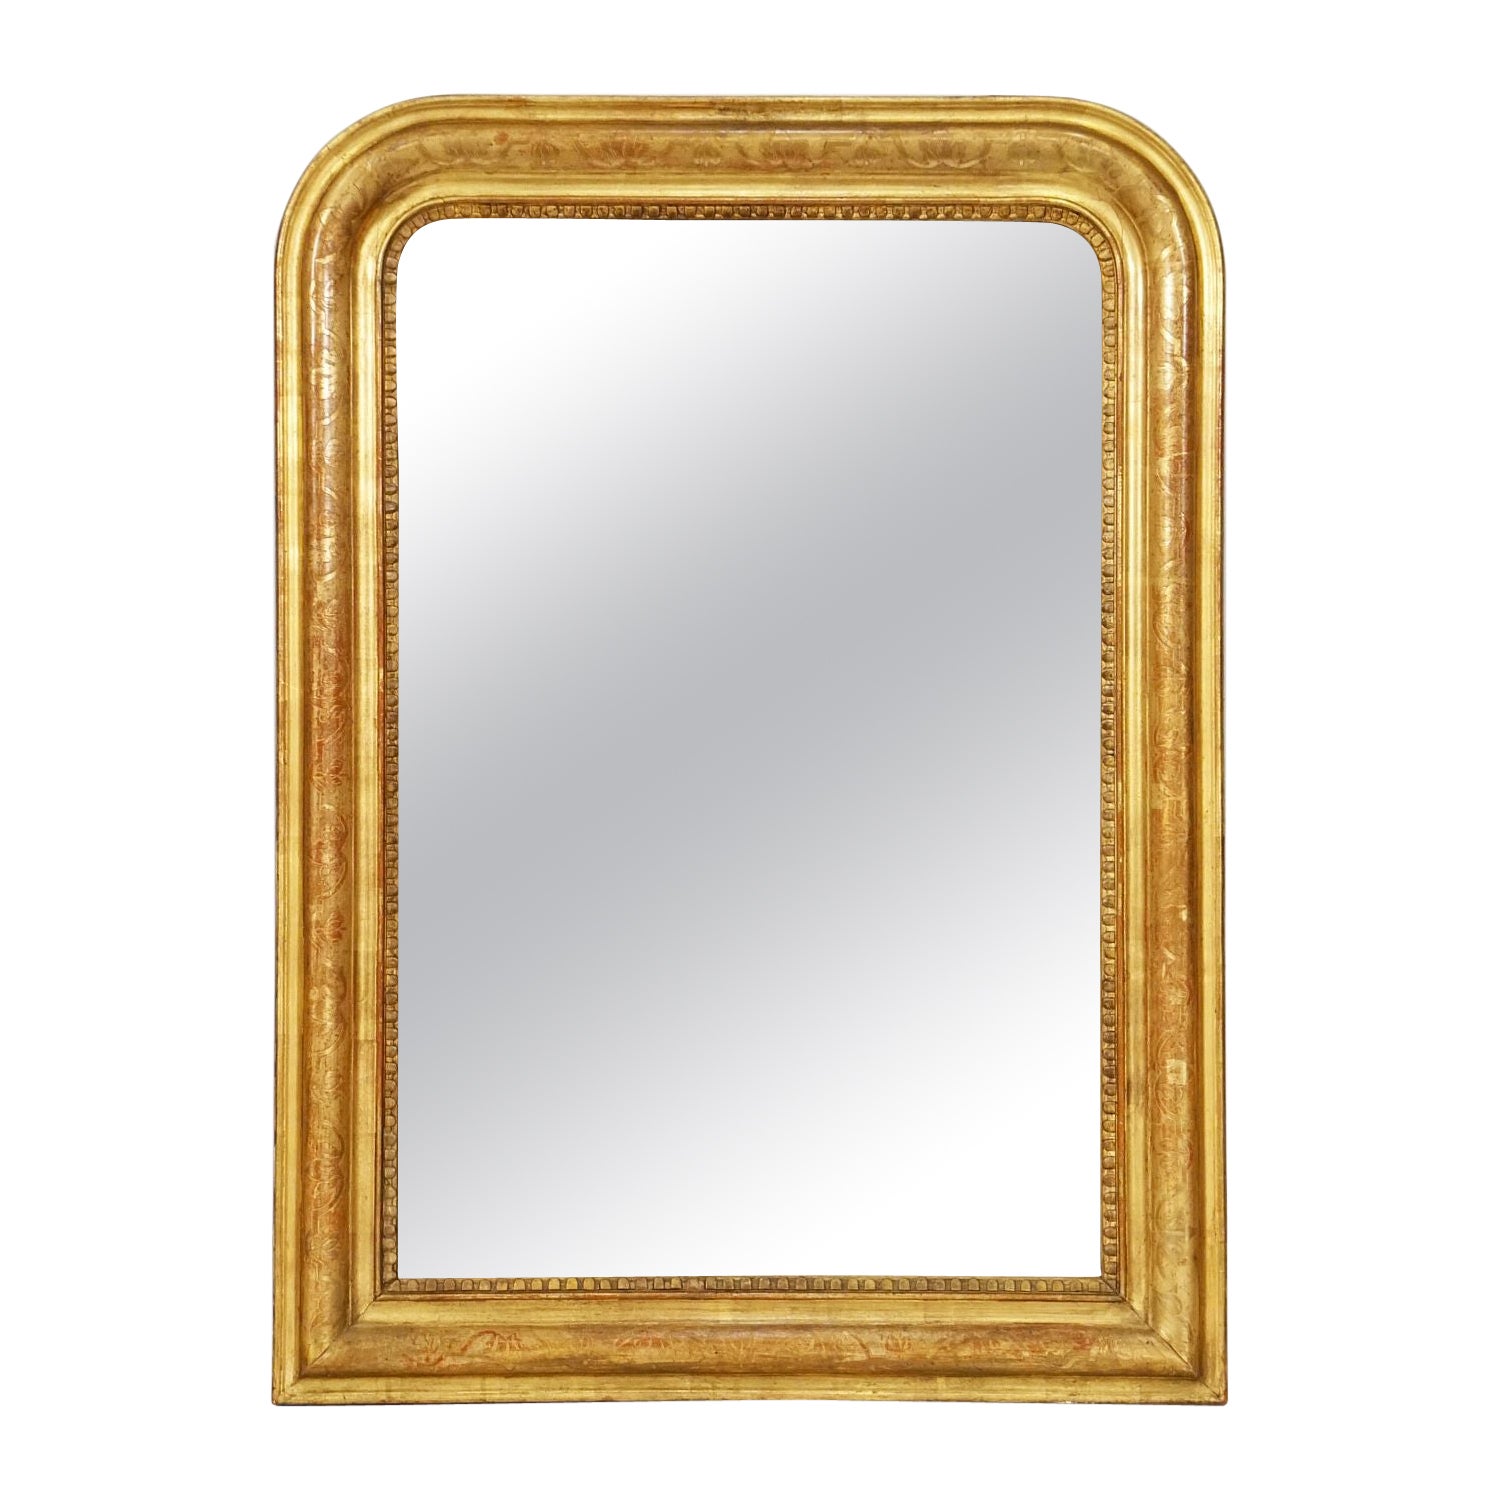 Louis Philippe Arch Top Gilt Mirror from France (H 38 3/4 x W 28 1/4)